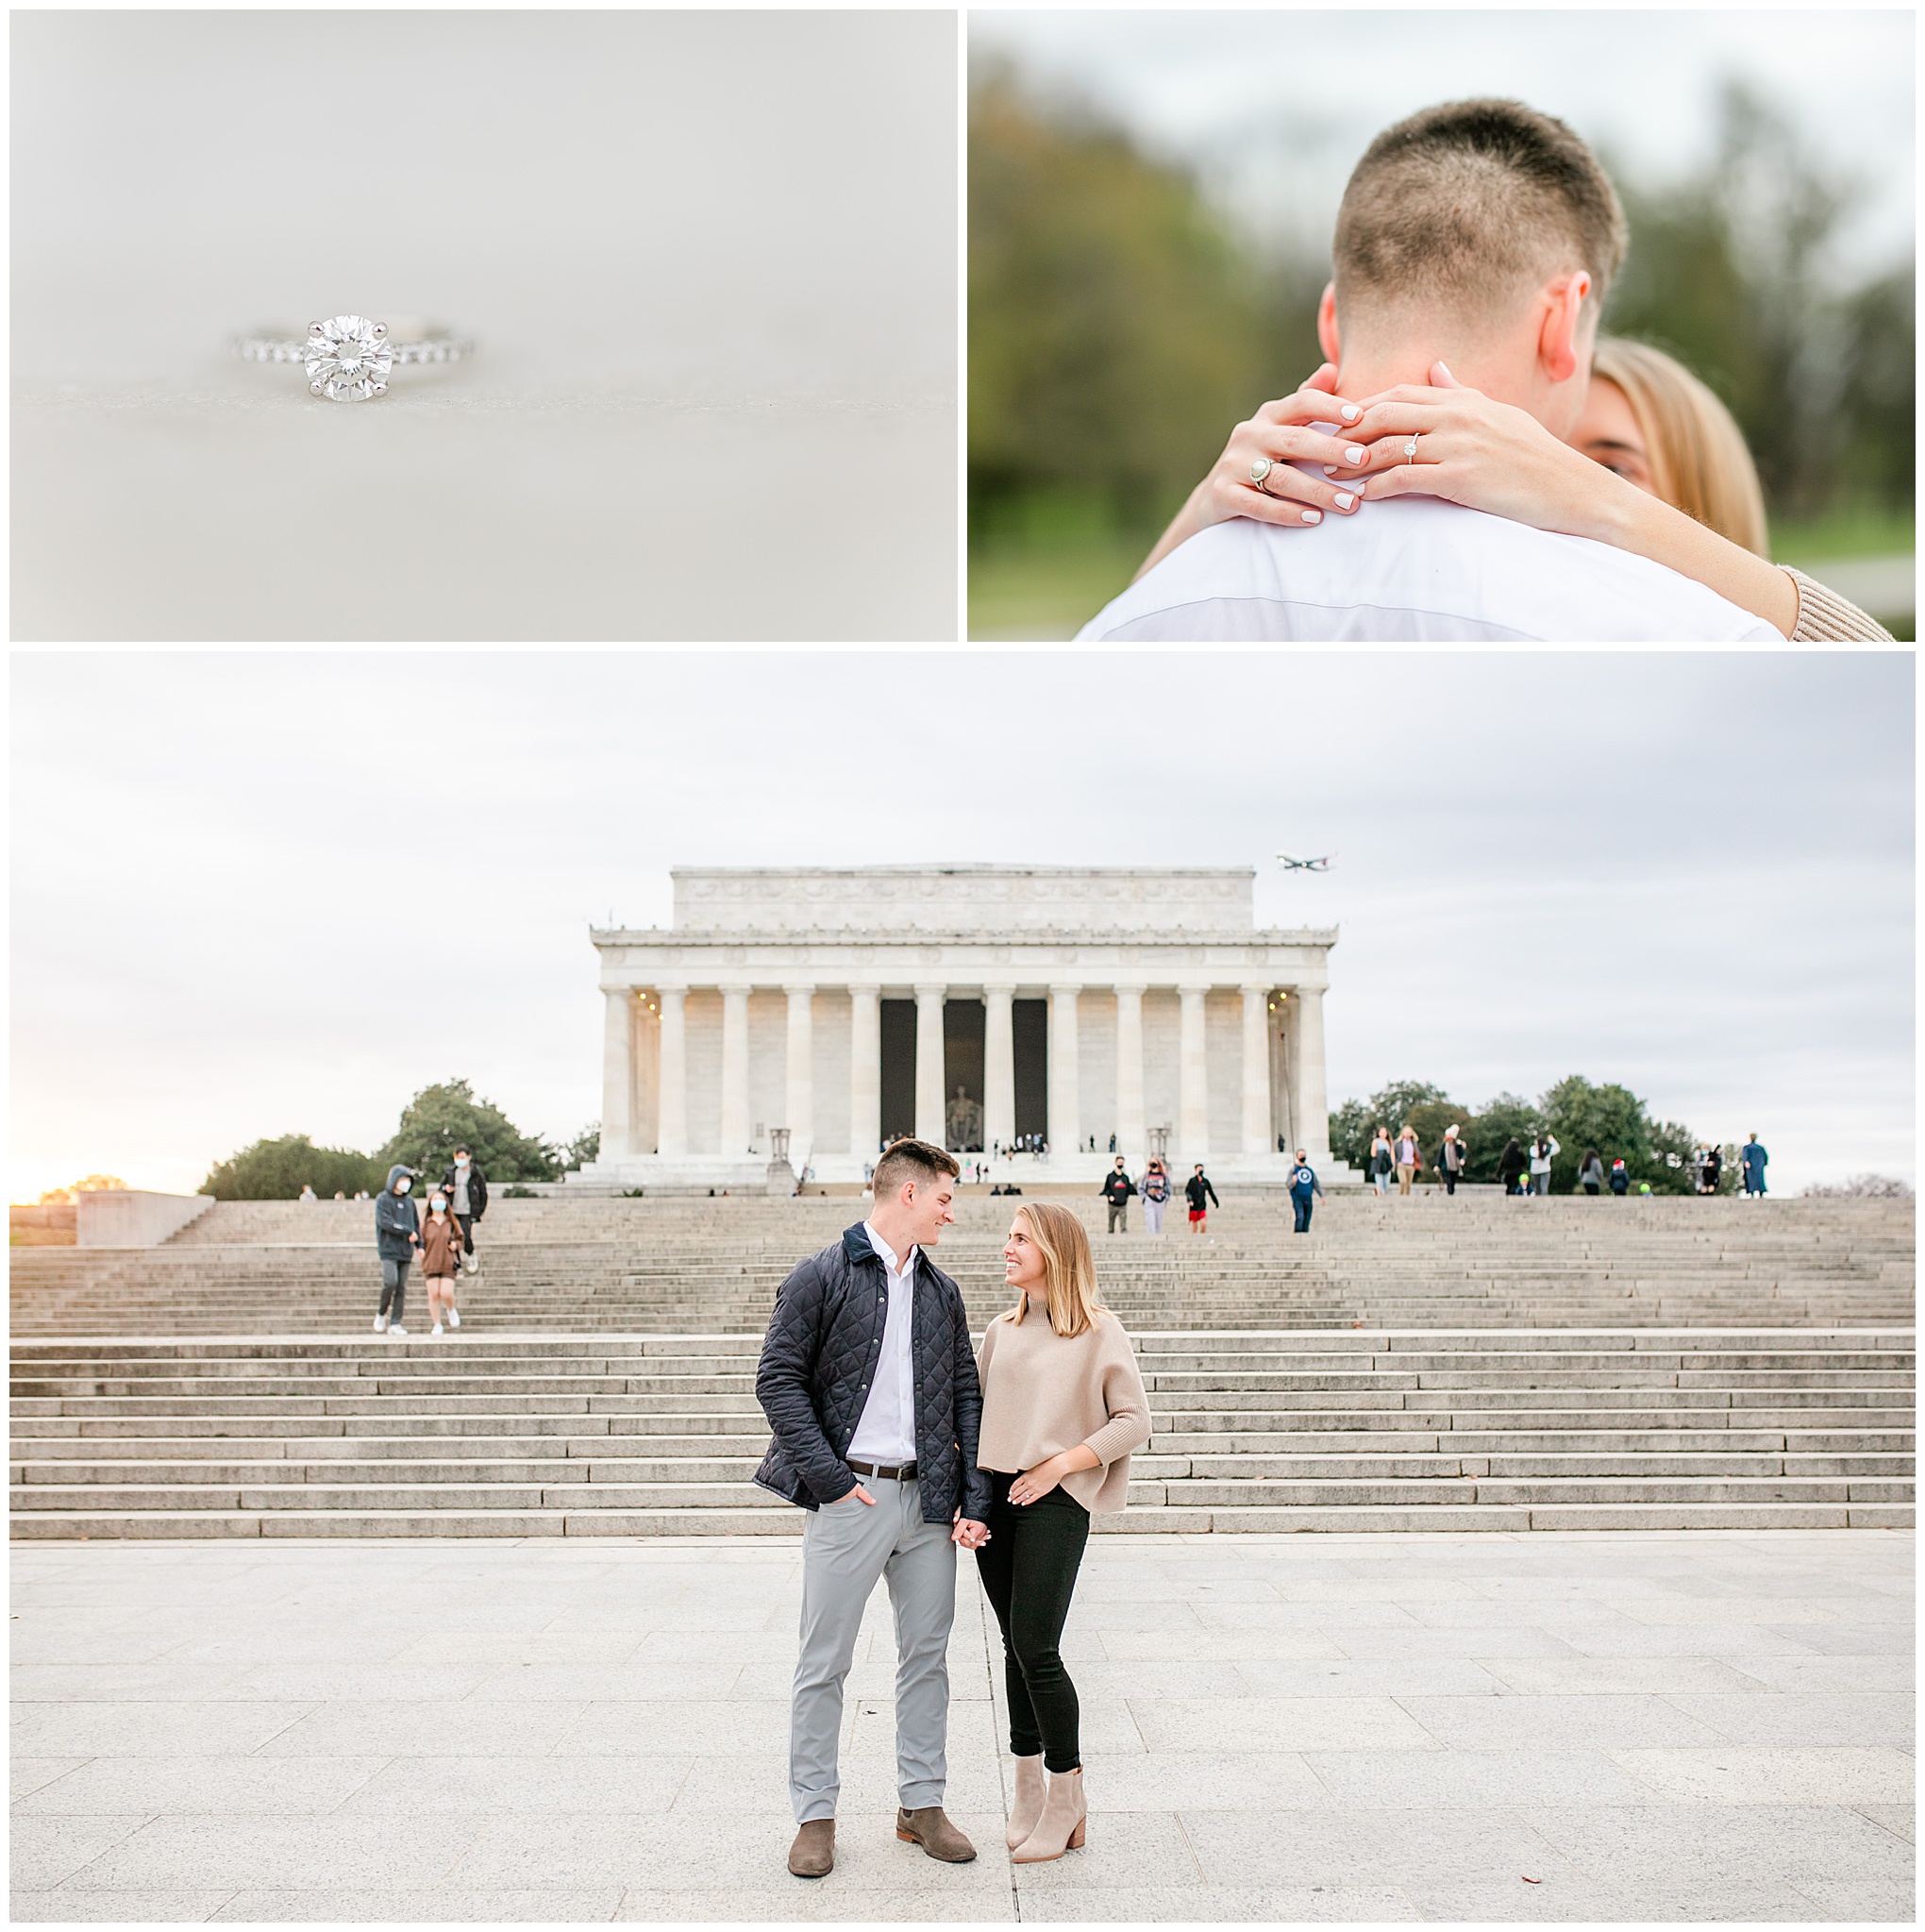 Lincoln Memorial surprise proposal, Lincoln Memorial proposal, National Mall proposal, Washington DC proposal, Washington DC proposal photographer, Washington DC wedding photographer, DC engagement photos, Rachel E.H. Photography, casual proposal photos, proposal portraits, natural light proposal, Lincoln Memorial, National Mall, black and white portrait, round solitaire diamond engagement ring, just engaged